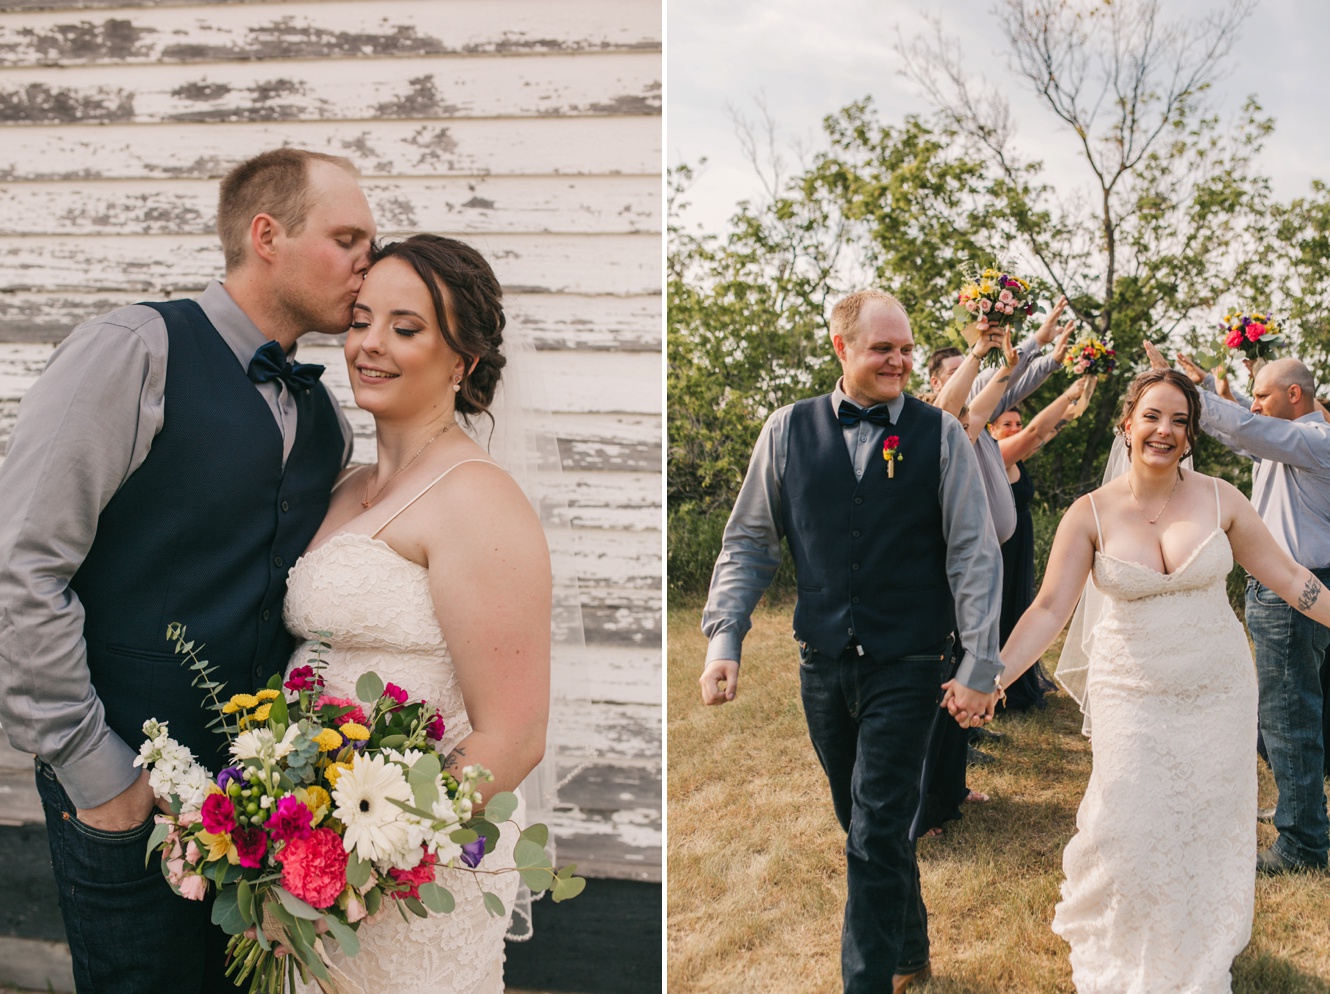 Casual Summer Wedding in Saskatchewan with colourful wildflowers and handmade elements